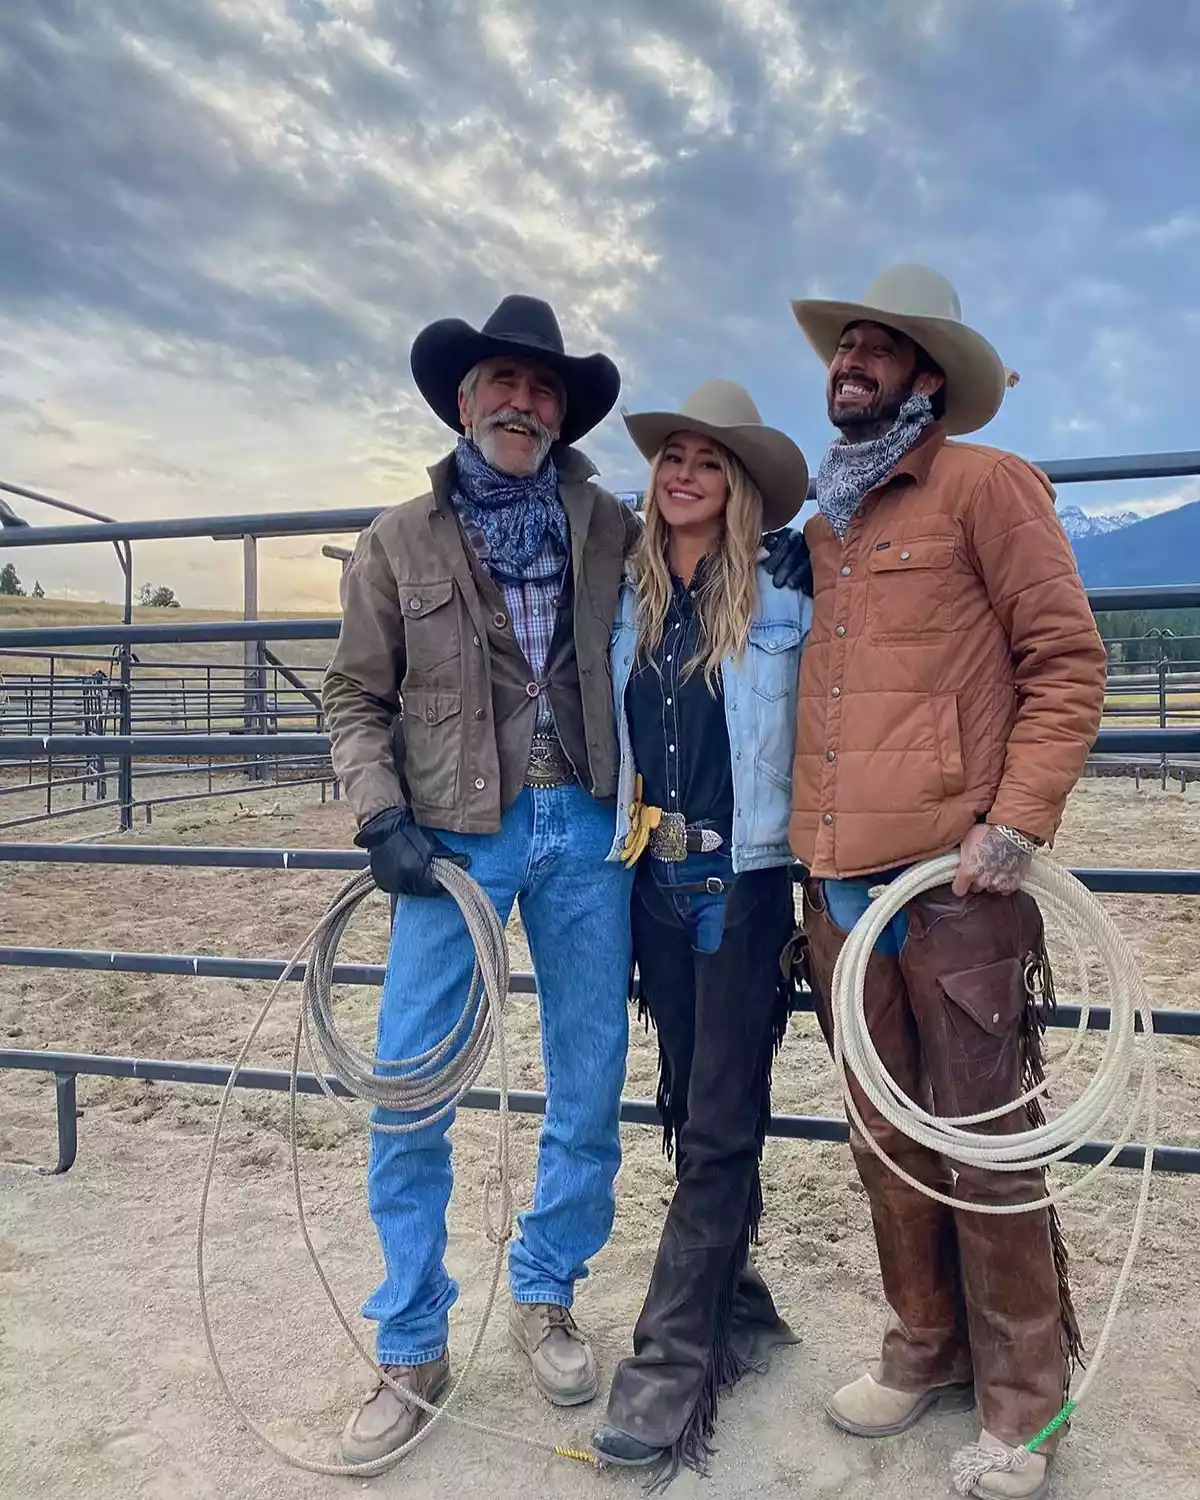 Are Yellowstone Stars Hassie Harrison and Ryan Bingham Married Actors Spotted Wearing Rings